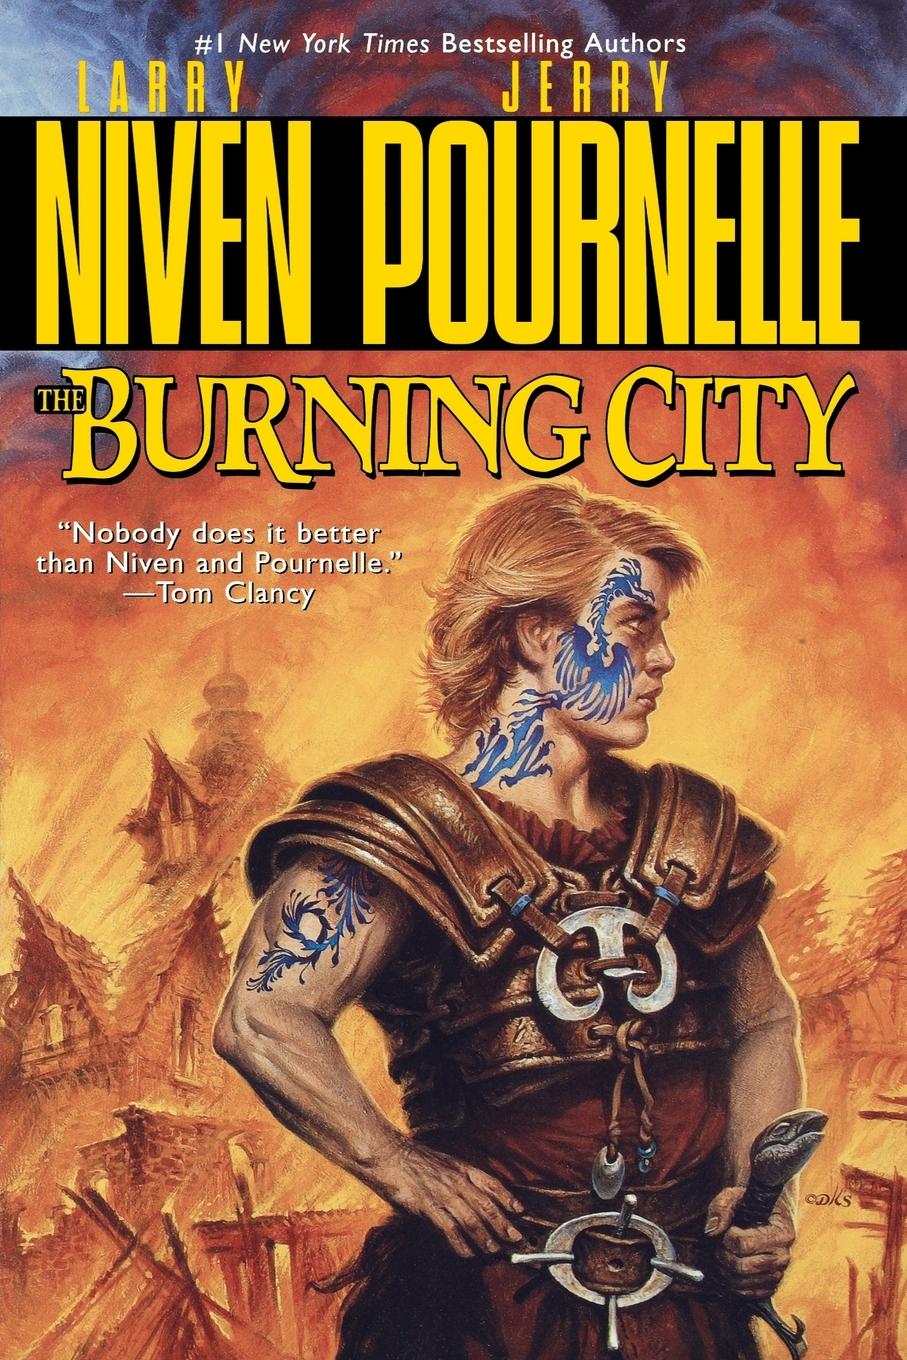 The Burning City - Niven, Larry Pournelle, Jerry